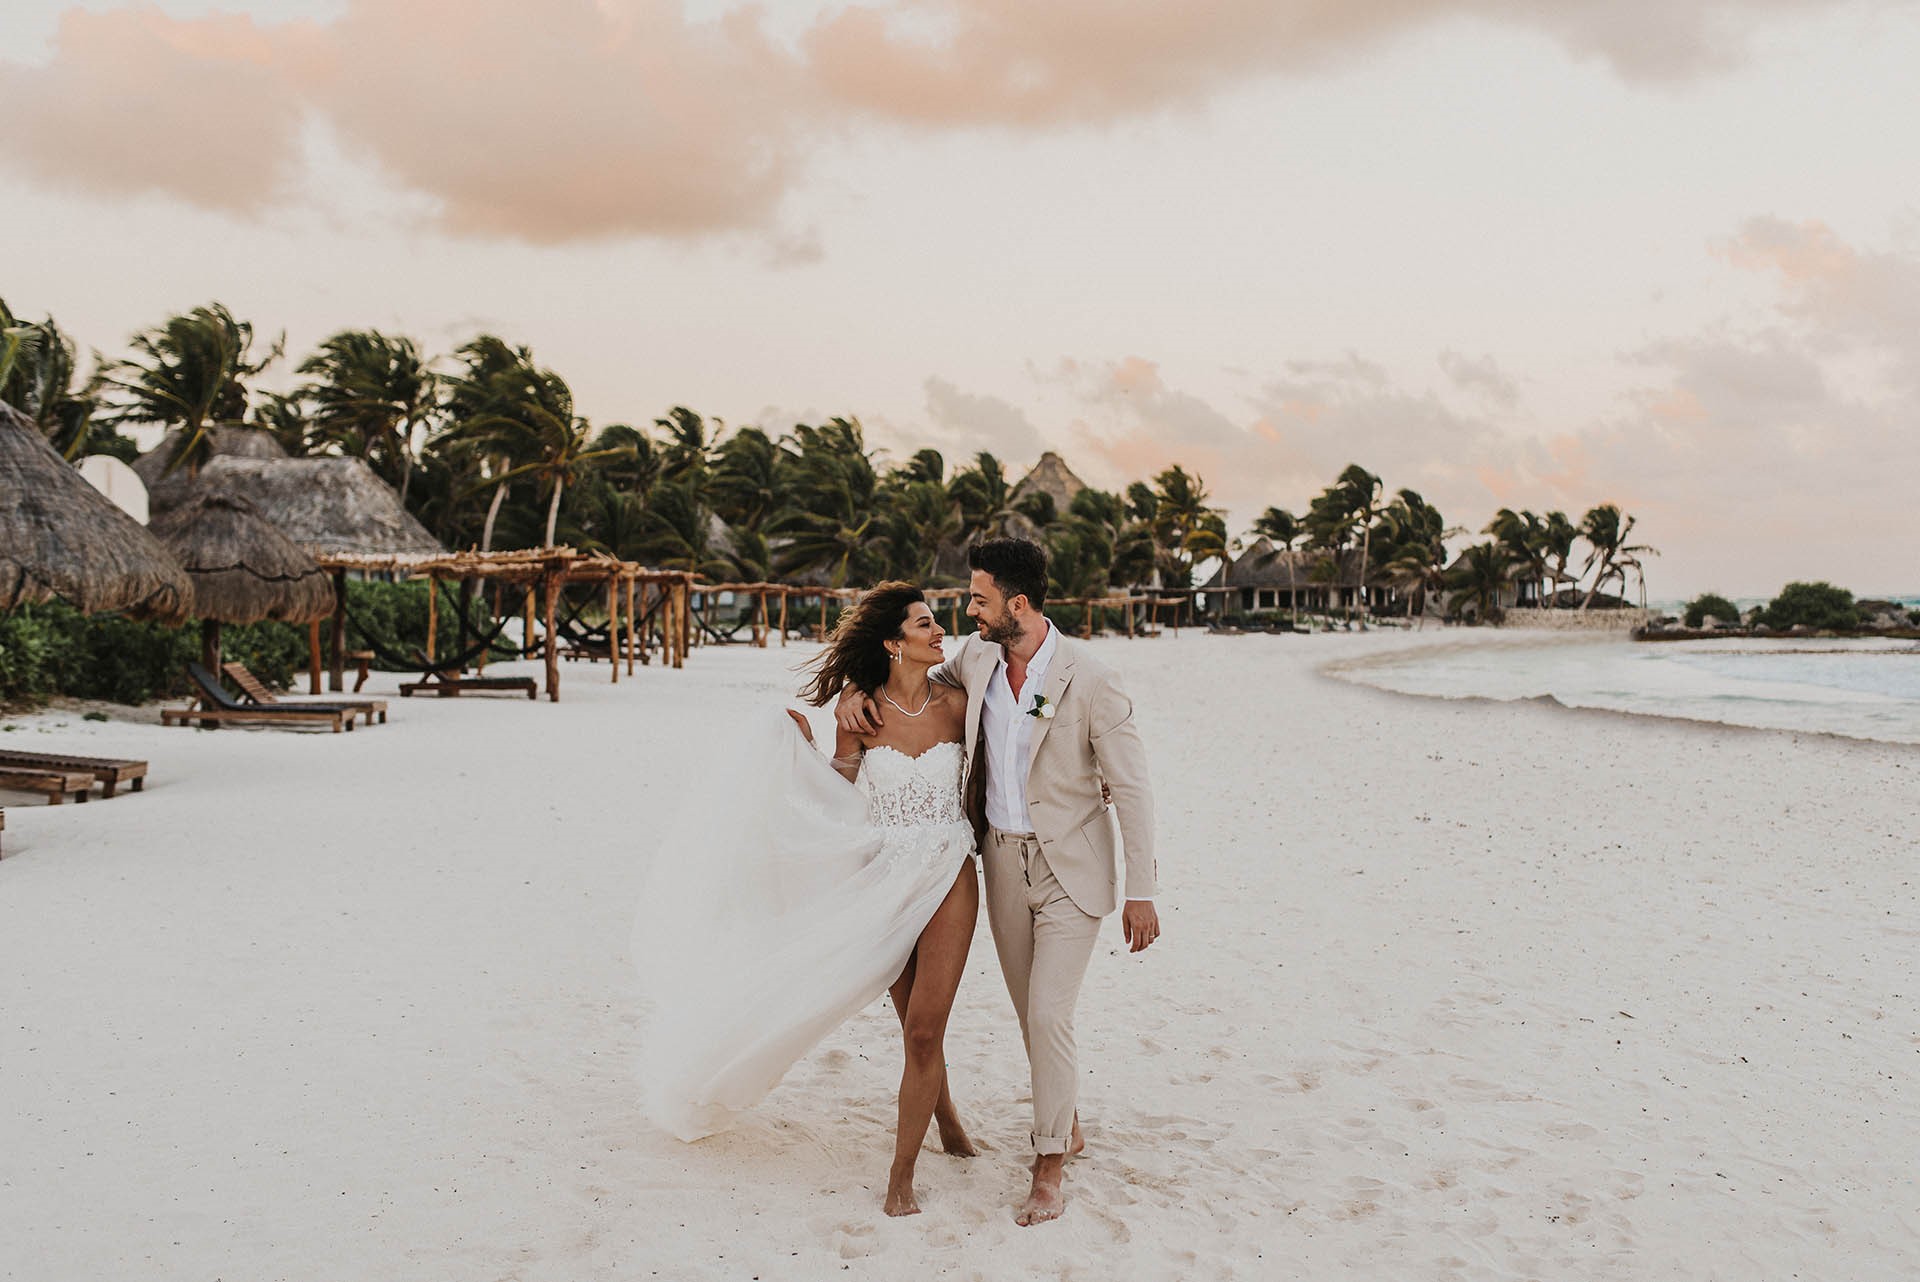 5-Reasons-for-a-Pre-Wedding-Photoshoot-in-Seychelles